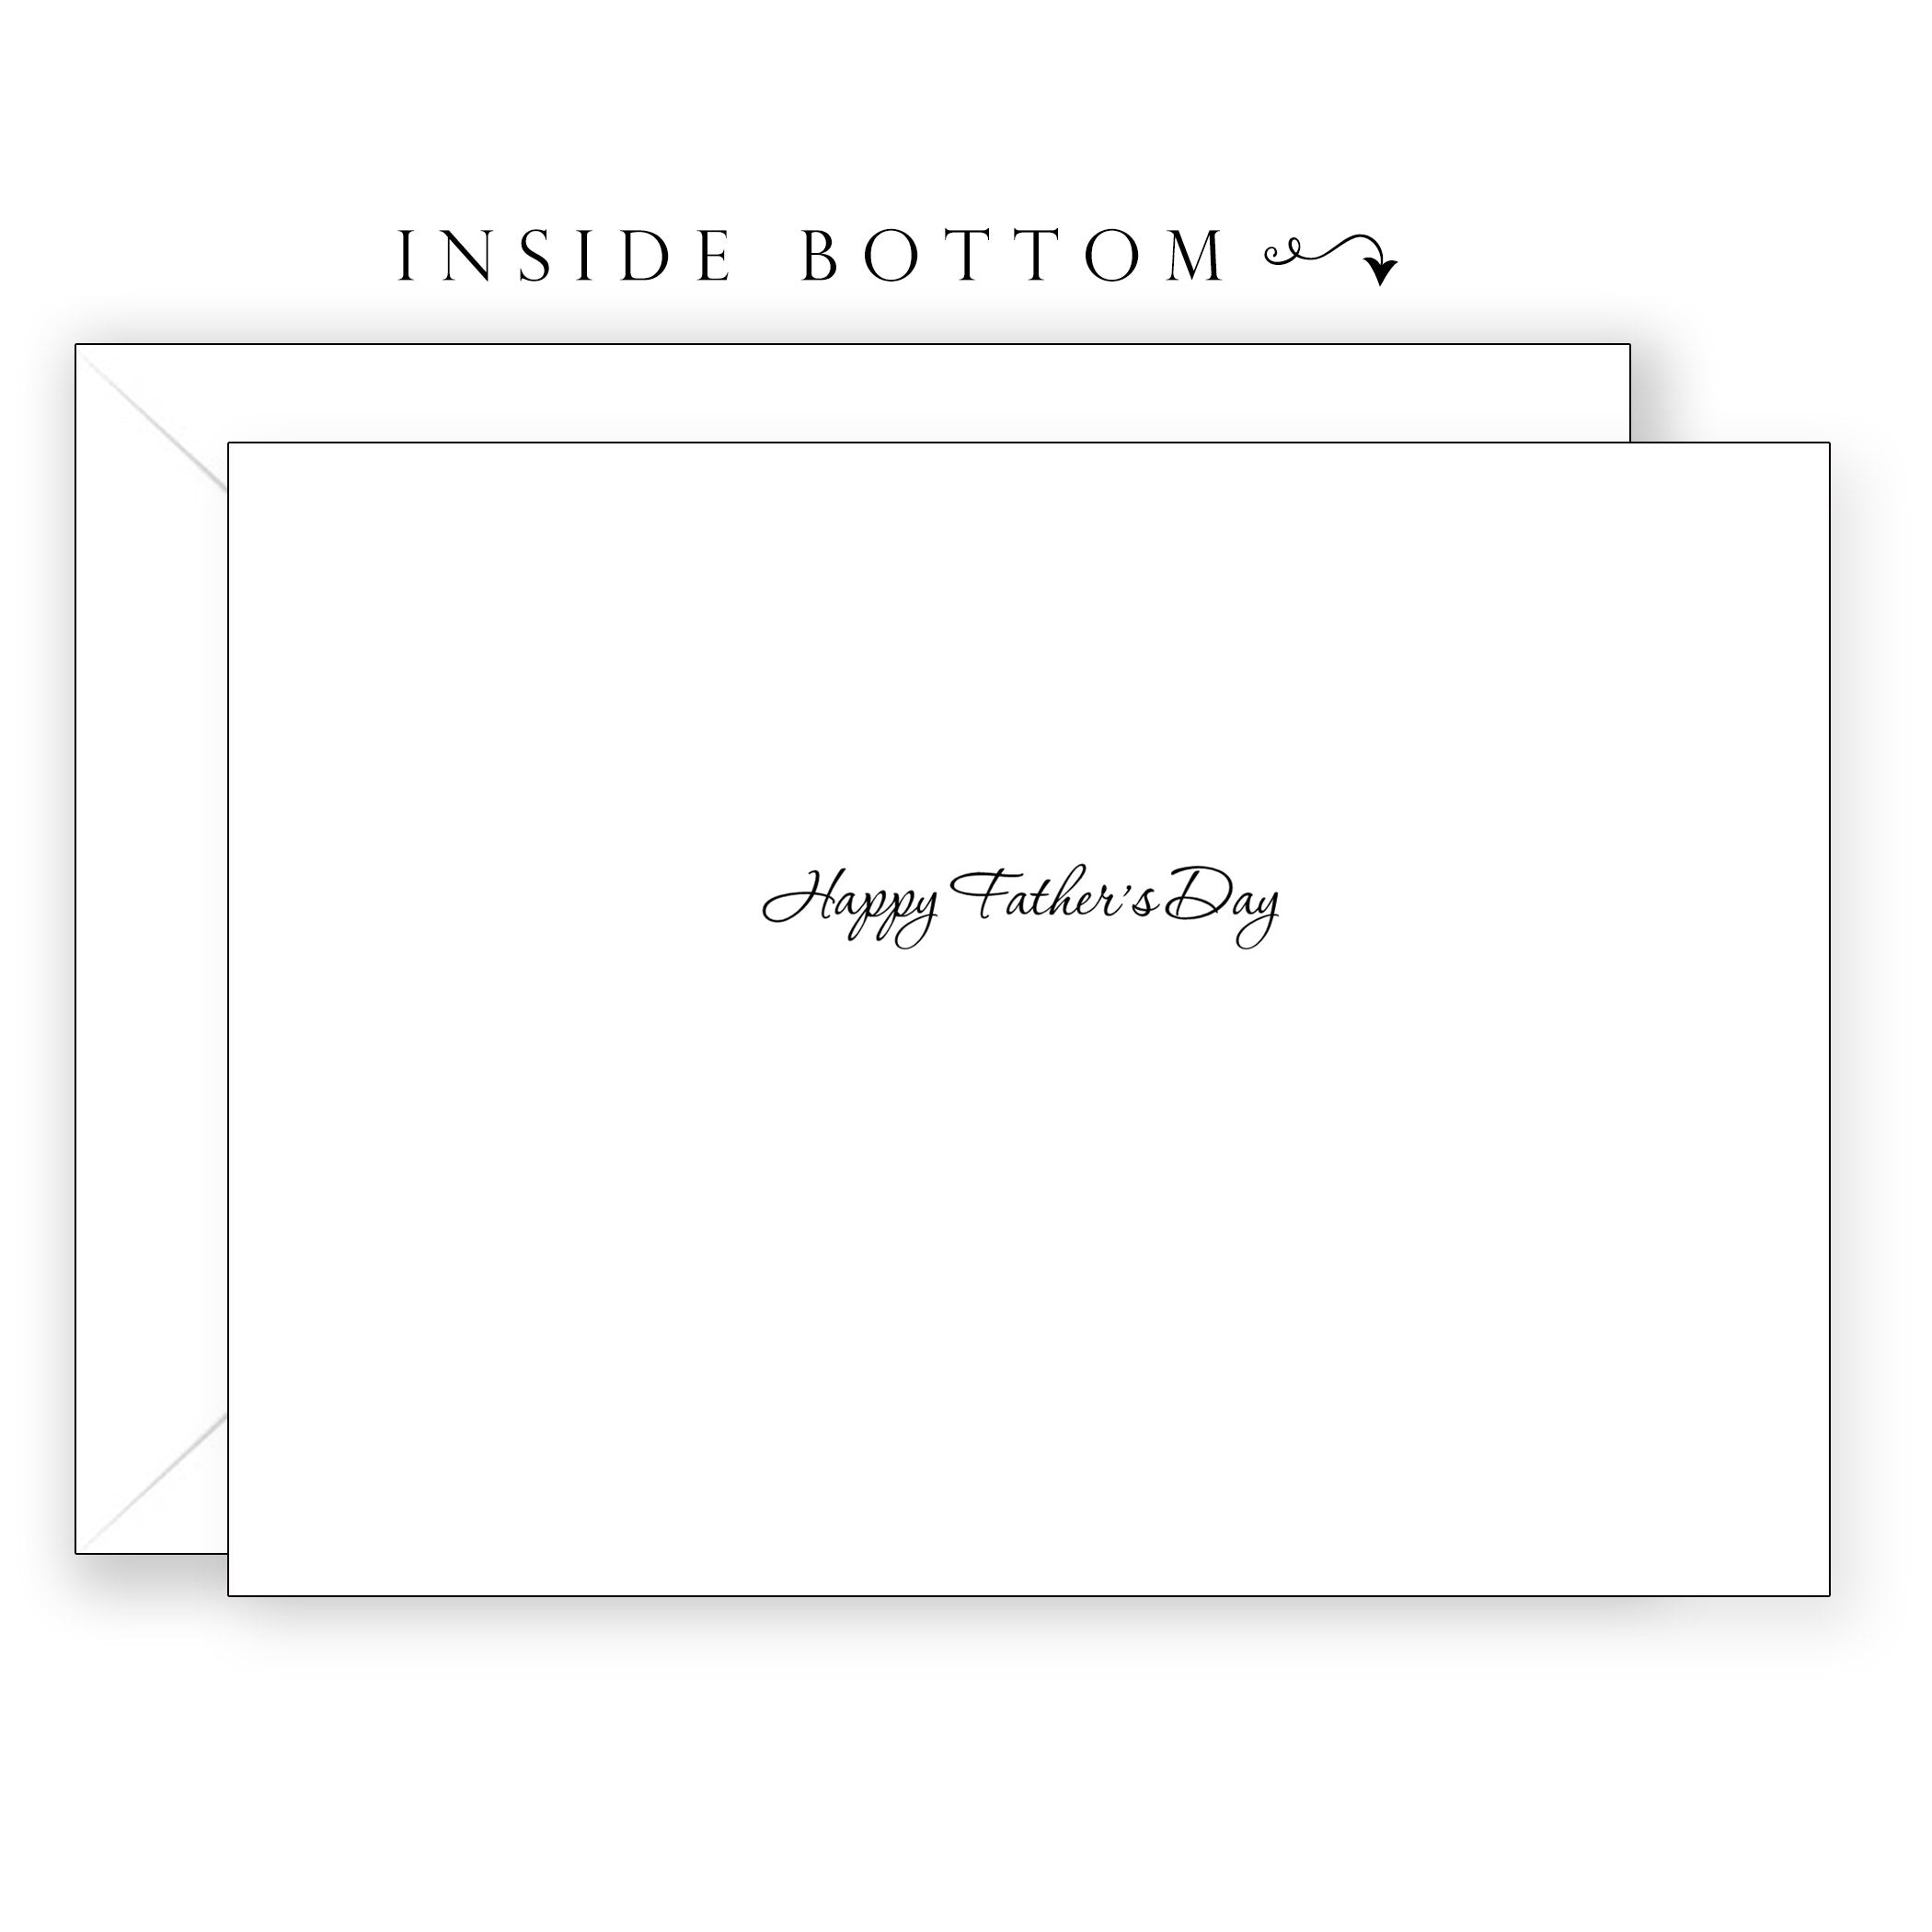 Light Our Way - Father's Day Card